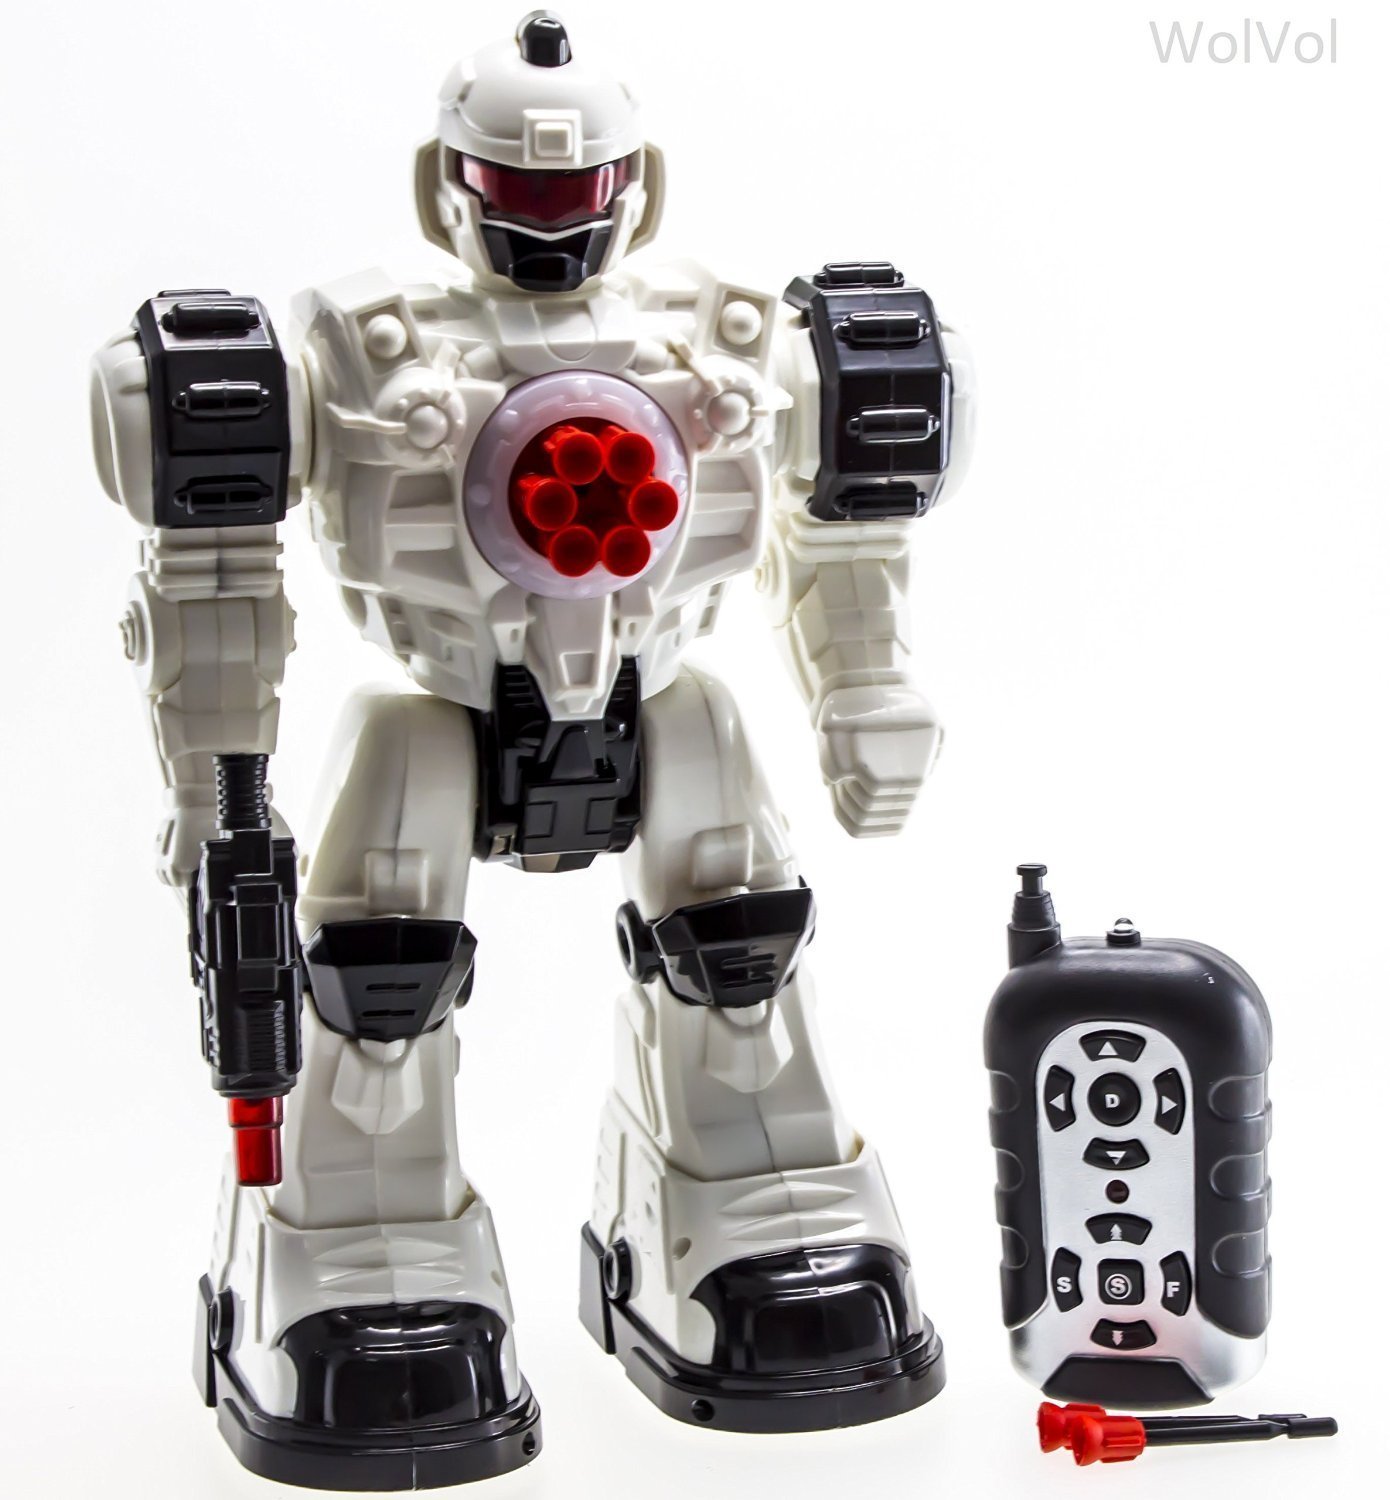 WolVol Remote Control Toy Robot